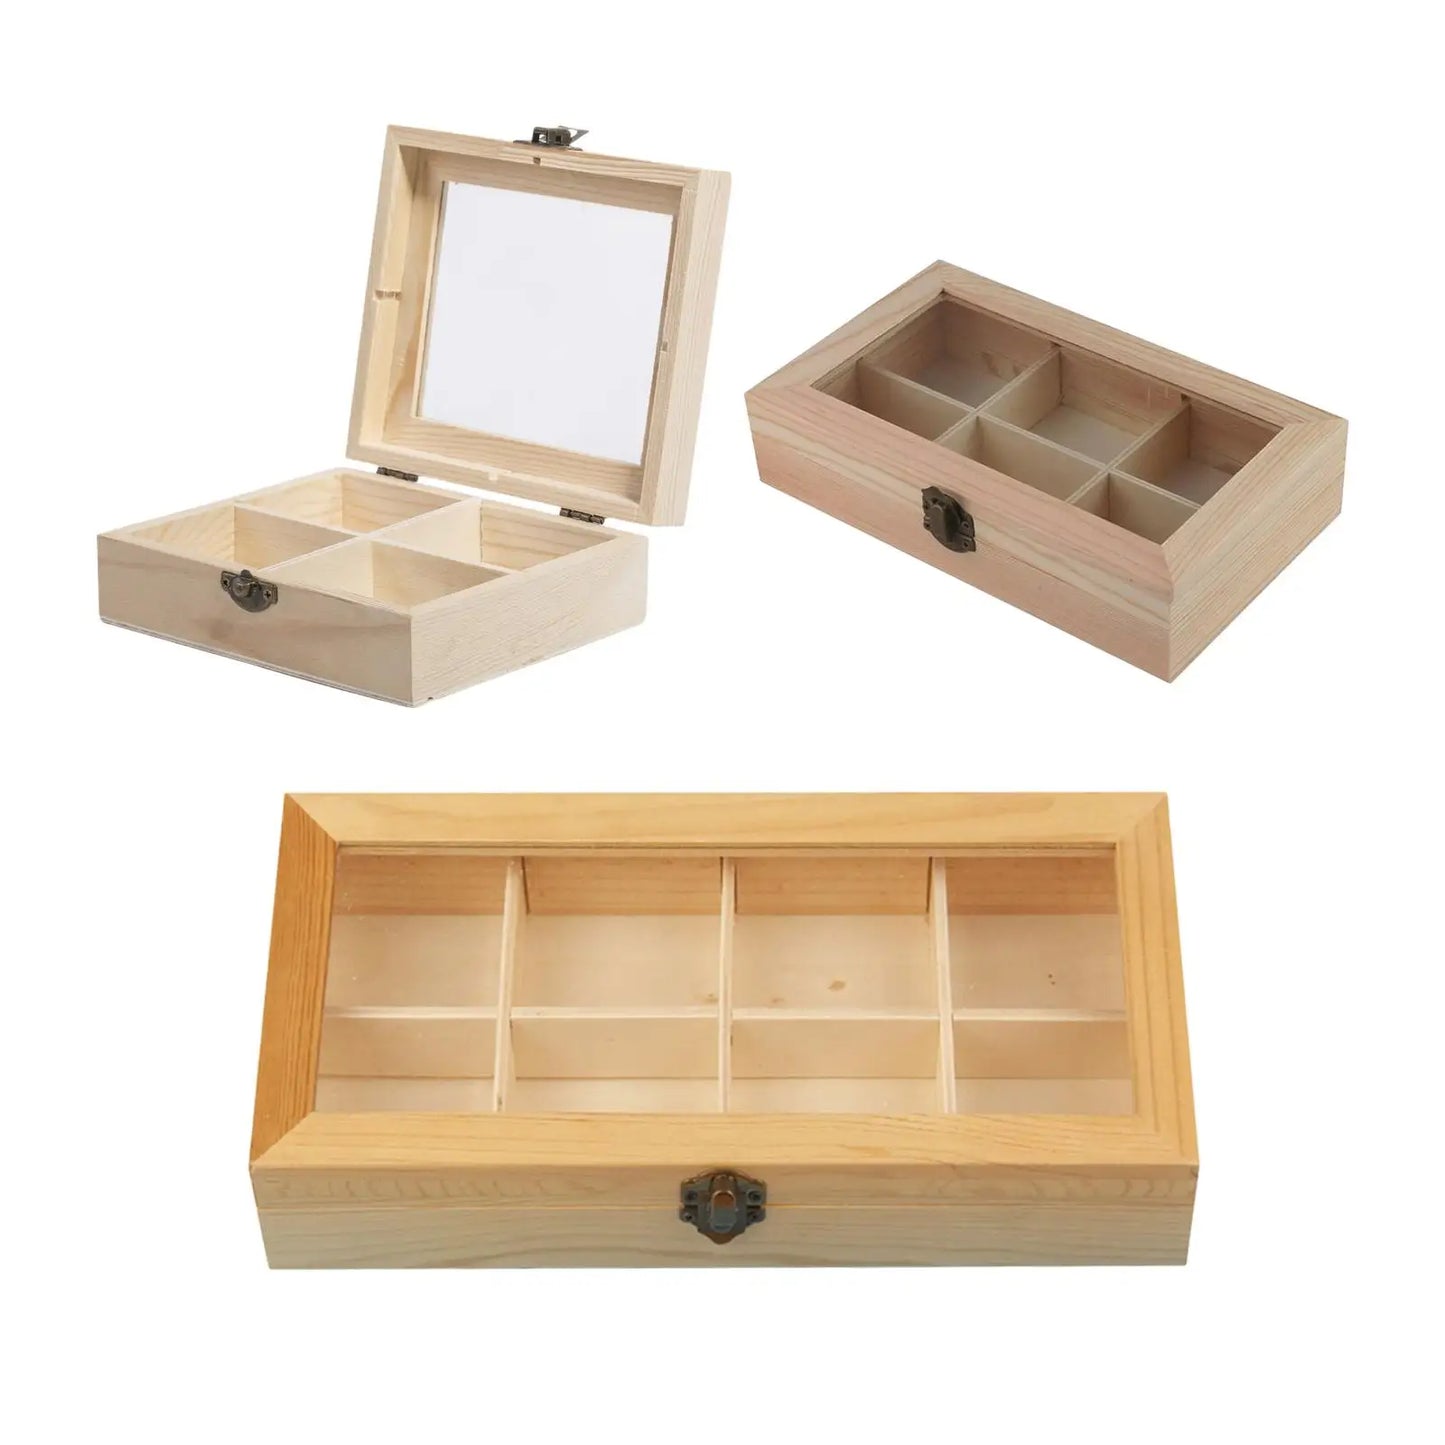 Wooden Tea Box Clear Lid Coffee Storage Container Holder Jewelry Flower Organizer Cosmetic Box Home Decor